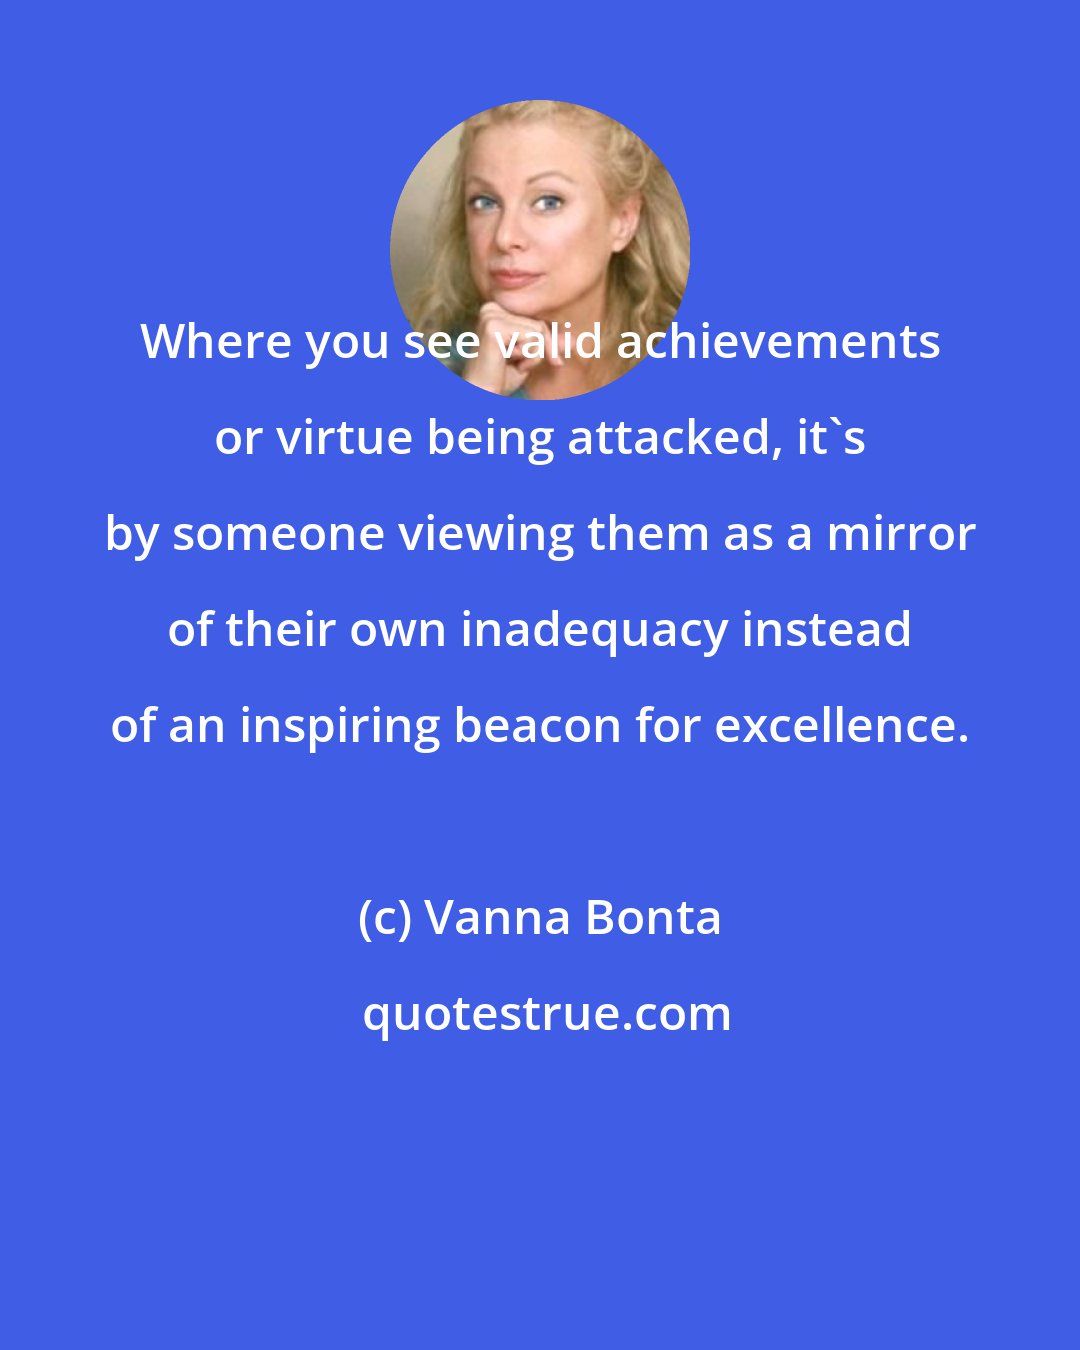 Vanna Bonta: Where you see valid achievements or virtue being attacked, it's by someone viewing them as a mirror of their own inadequacy instead of an inspiring beacon for excellence.